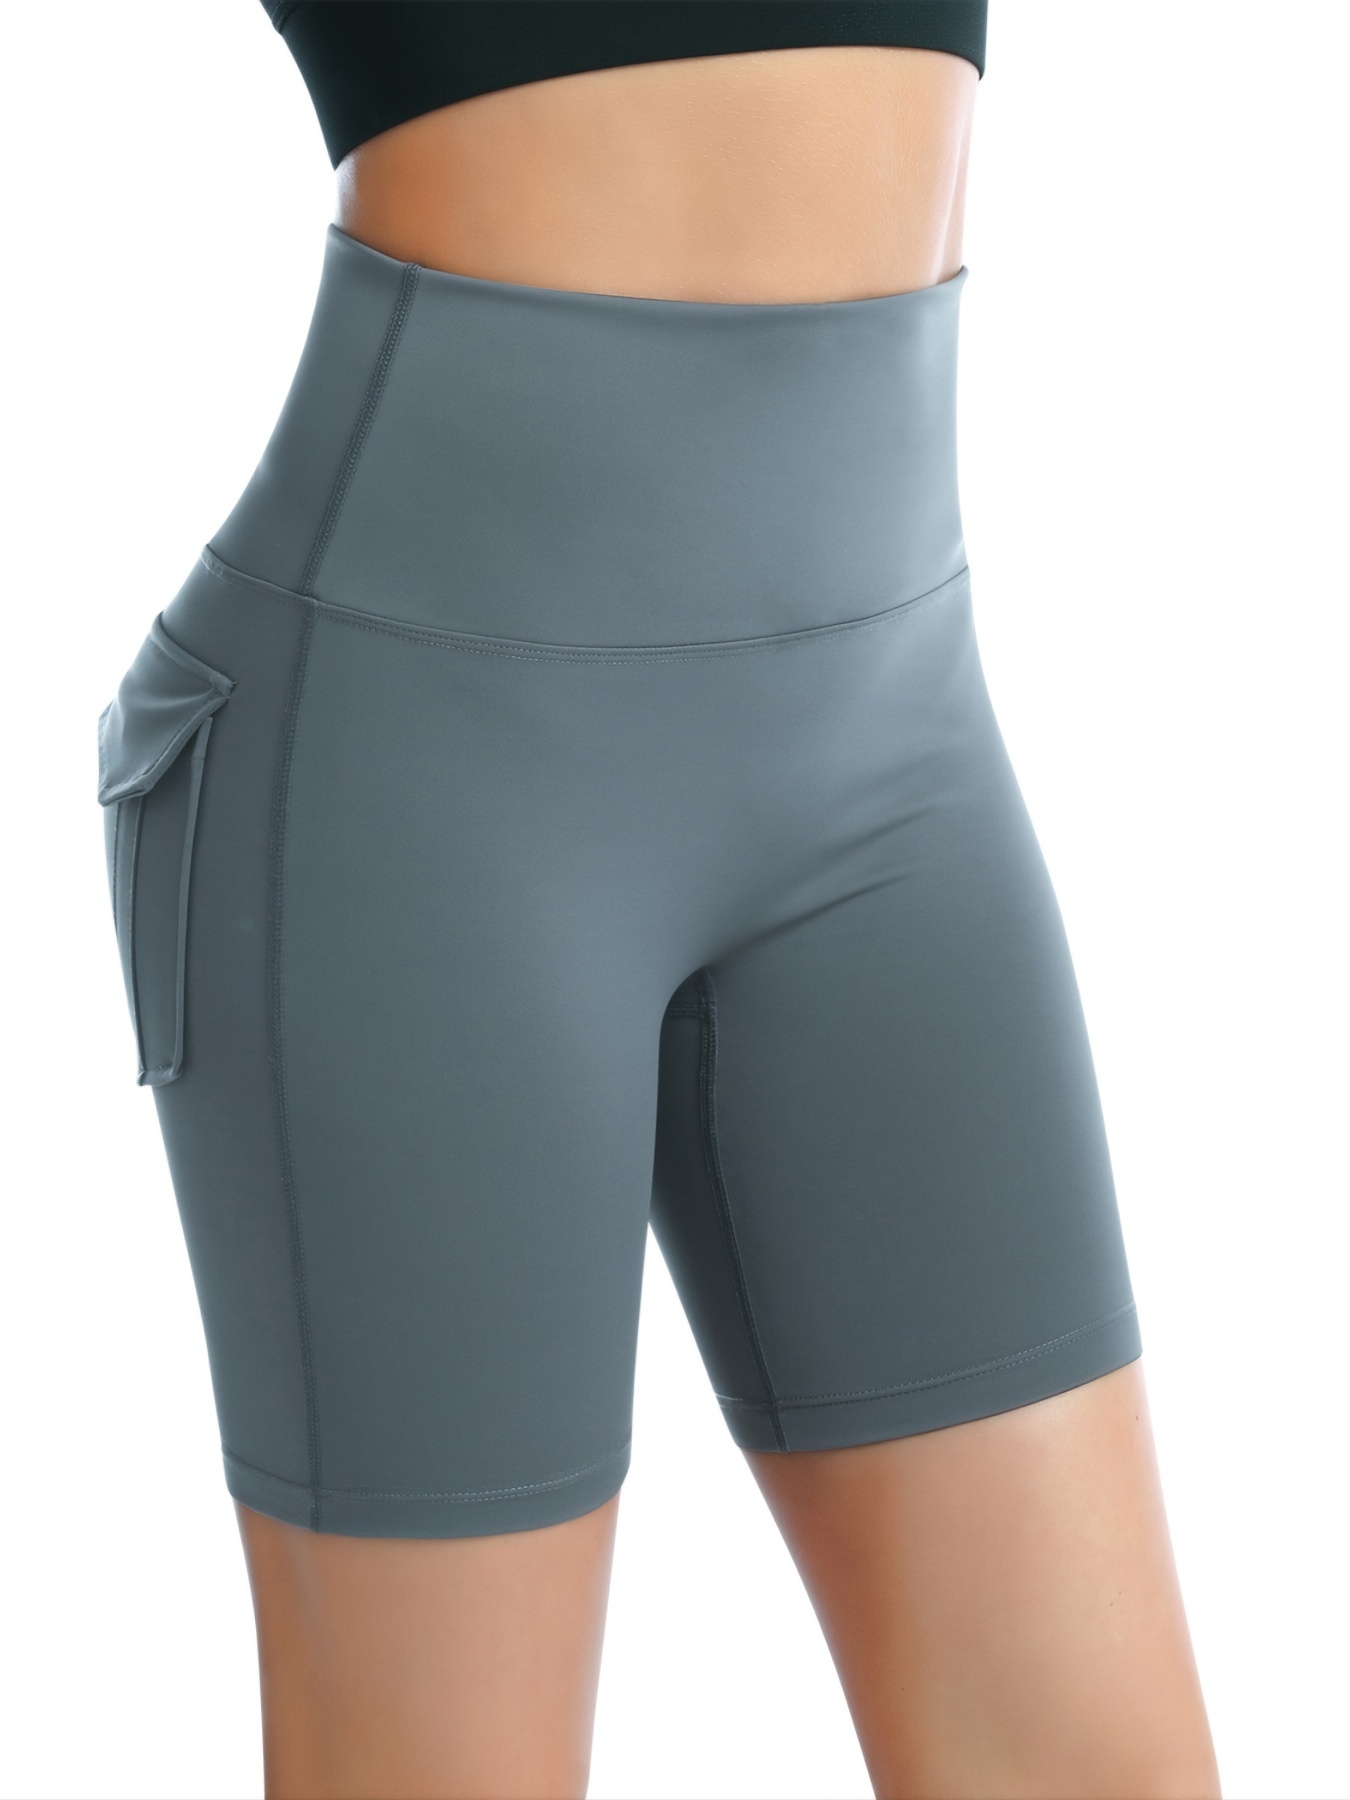  High Waisted Yoga Shorts for Women Pocketed Workout